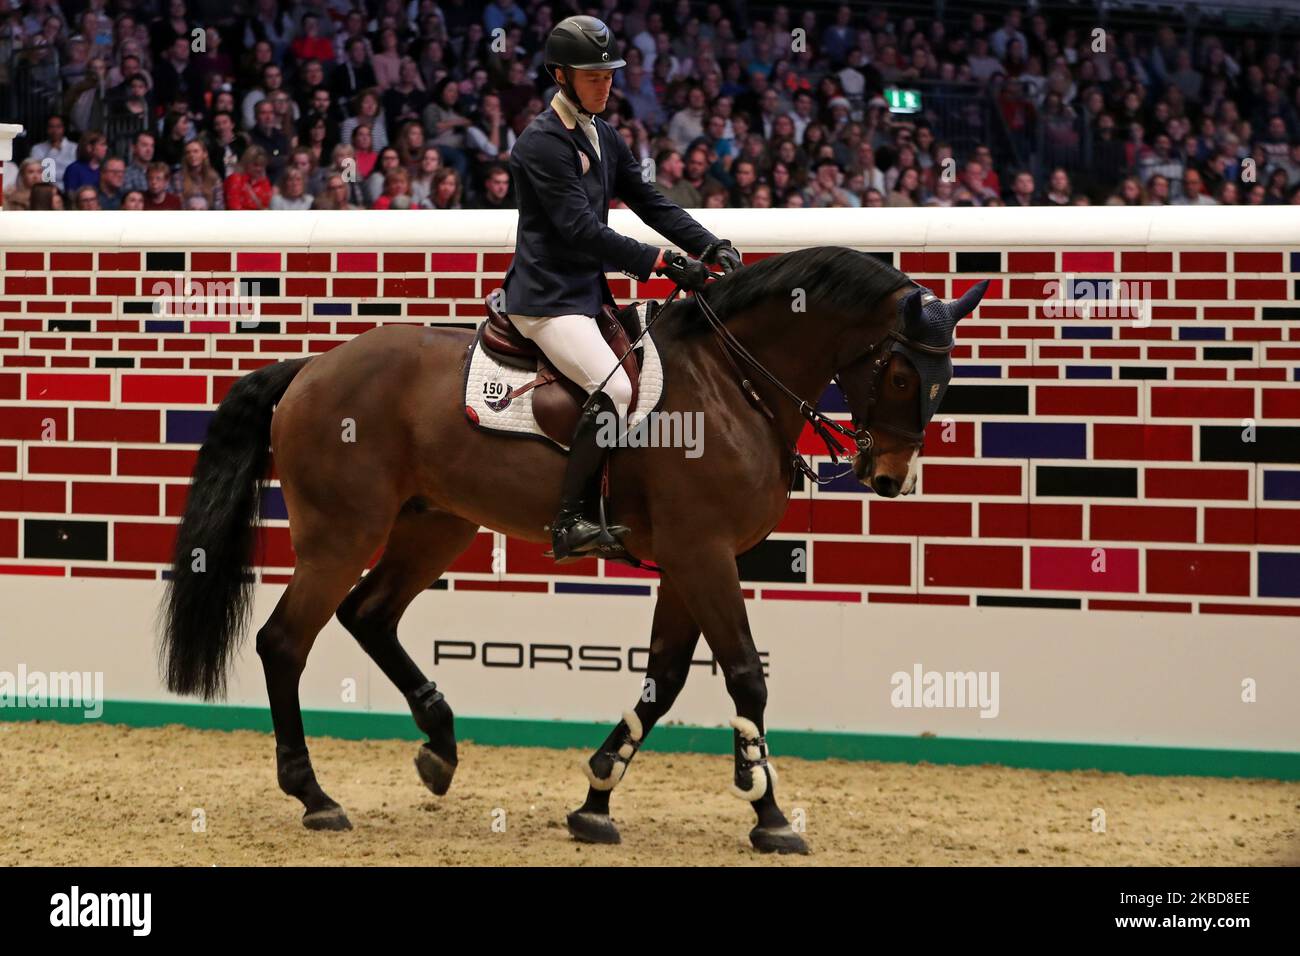 William Whitaker riding RMF Charly during the Cayenne Puissance Event at the International Horse Show at Olympia, London on Wednesday 18th December 2019. (Photo by Jon Bromley/MI News/NurPhoto) Stock Photo